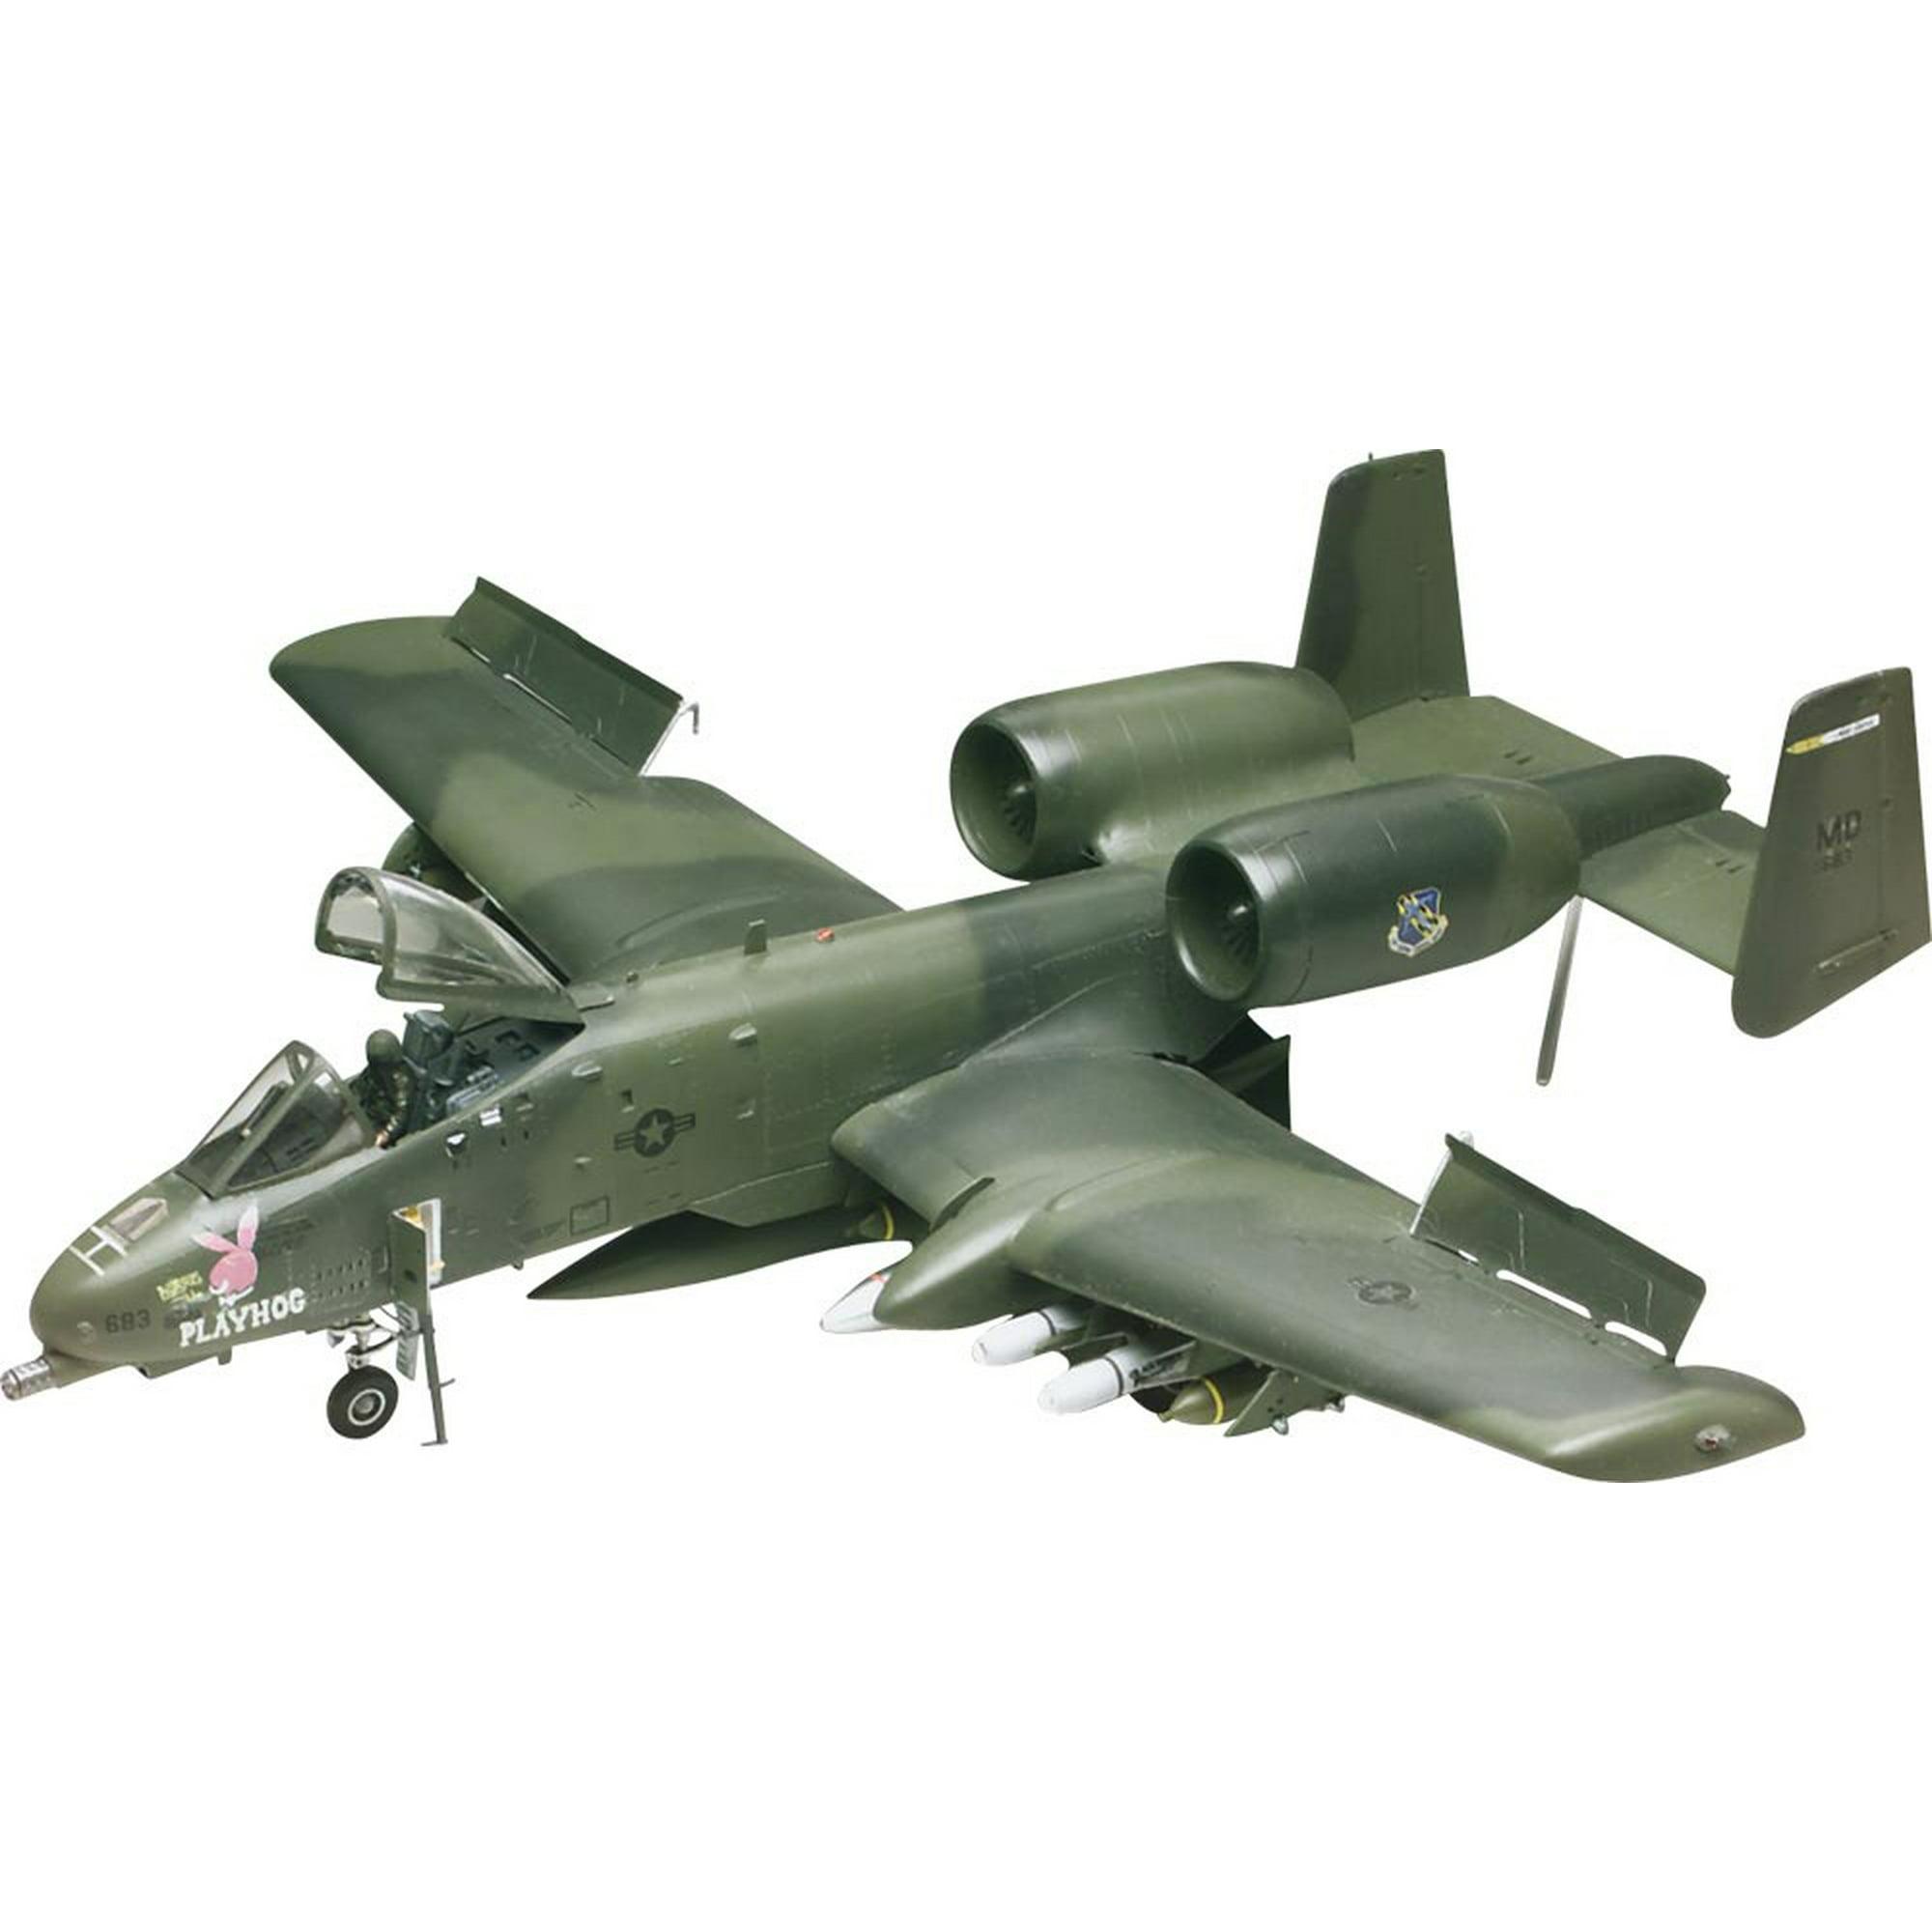 Rc A10 Warthog For Sale:Essential Features to Consider When Purchasing RC A10 Warthog